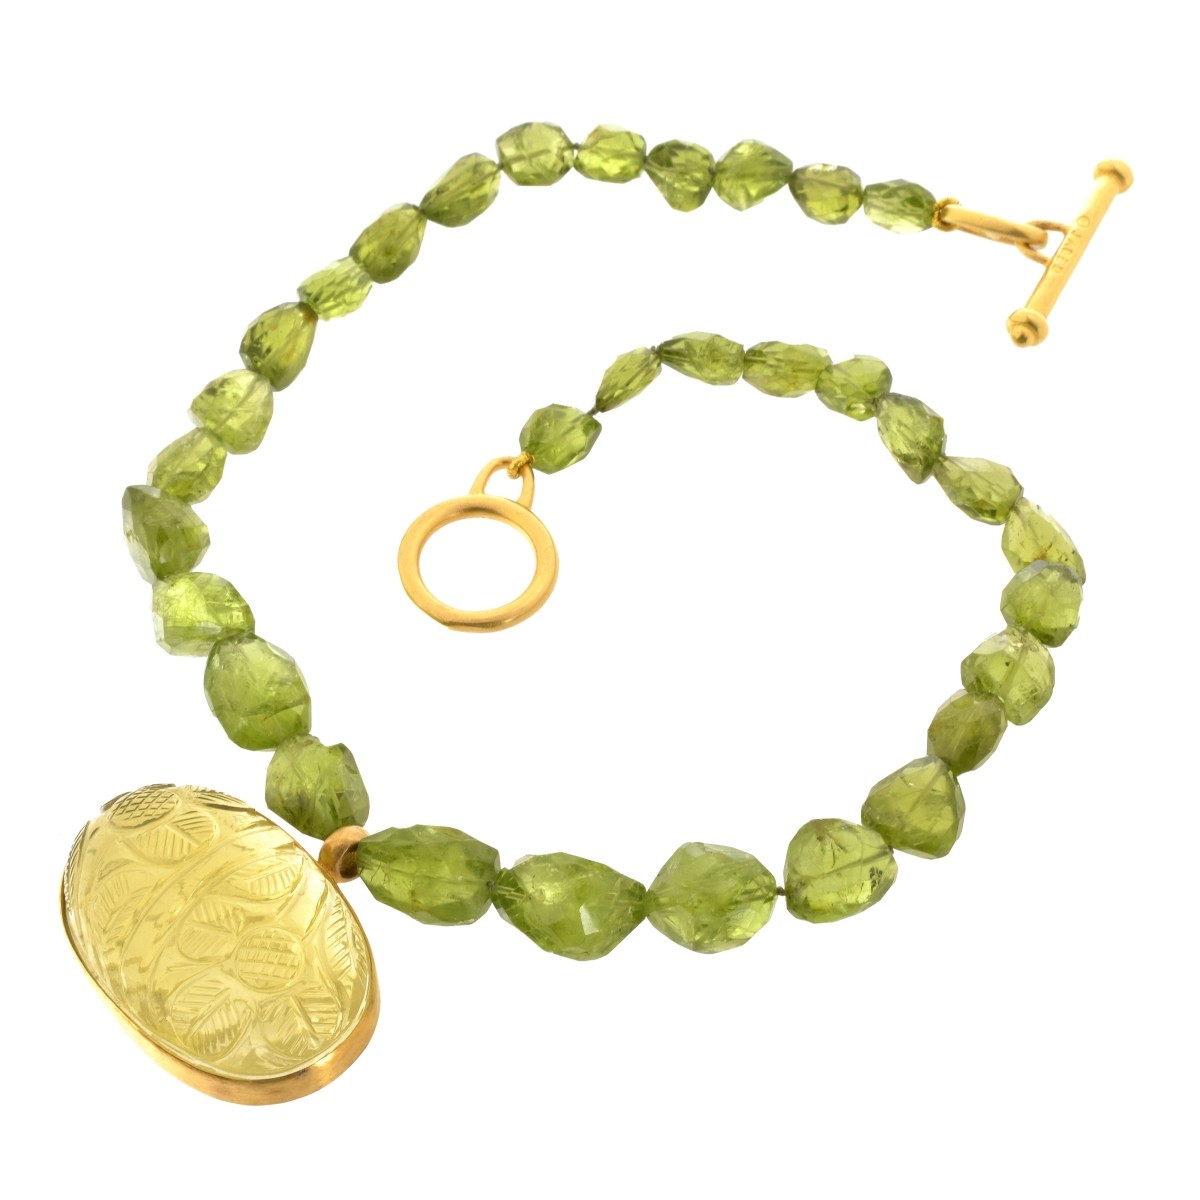 Peridot and Citrine Necklace